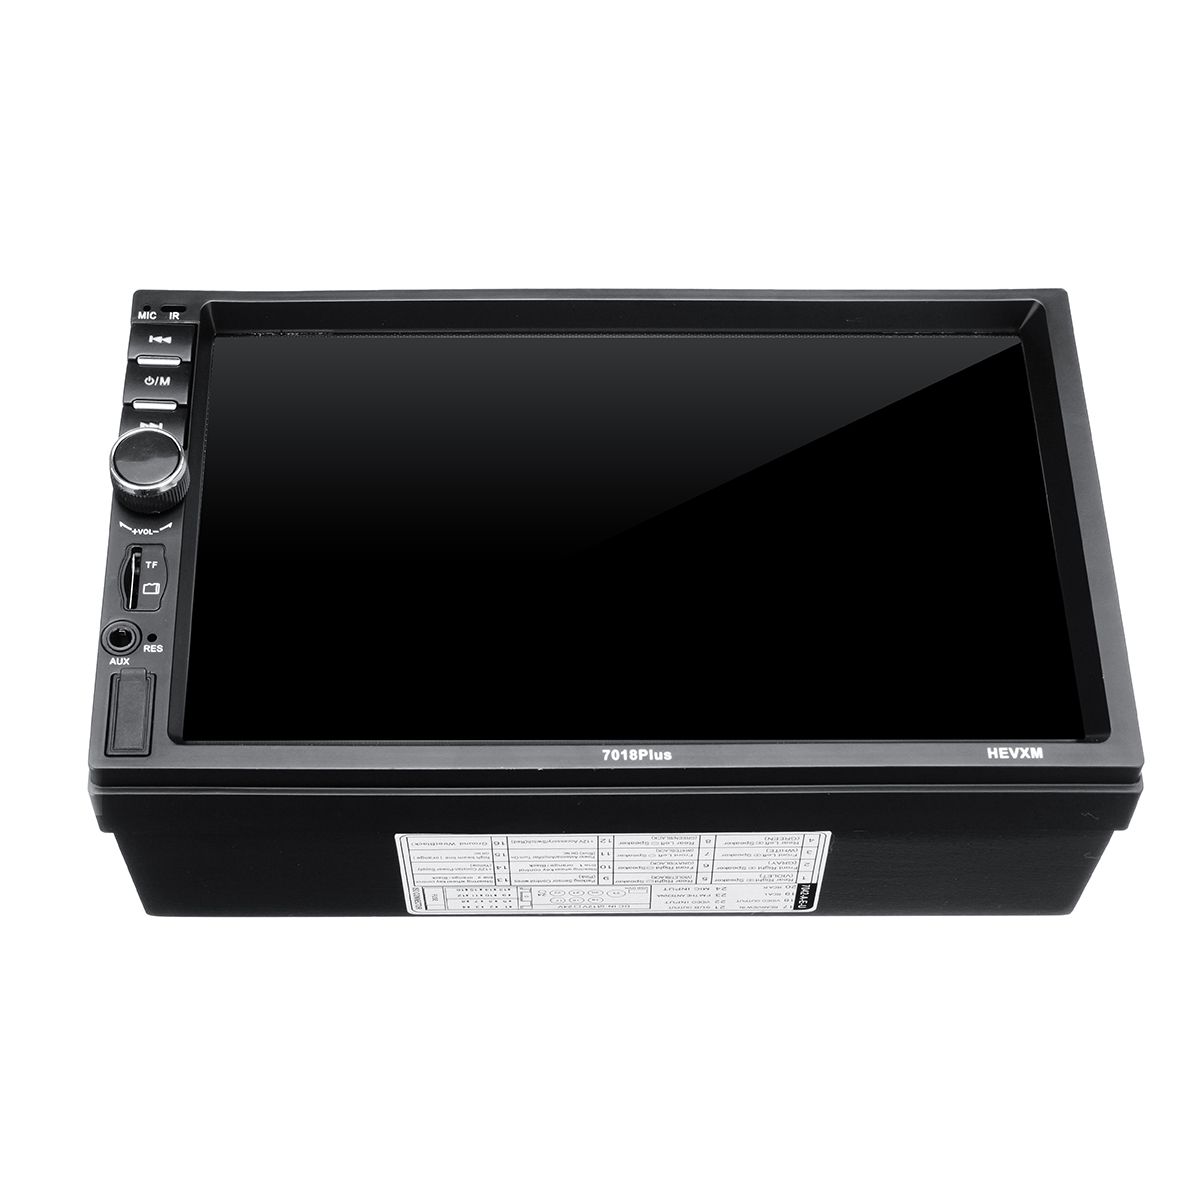 7018Plus-7Inch-2-DIN-Car-MP5-Player-Multimedia-Stereo-Radio-Touch-Screen-FM-bluetooth-Remote-Control-1694093